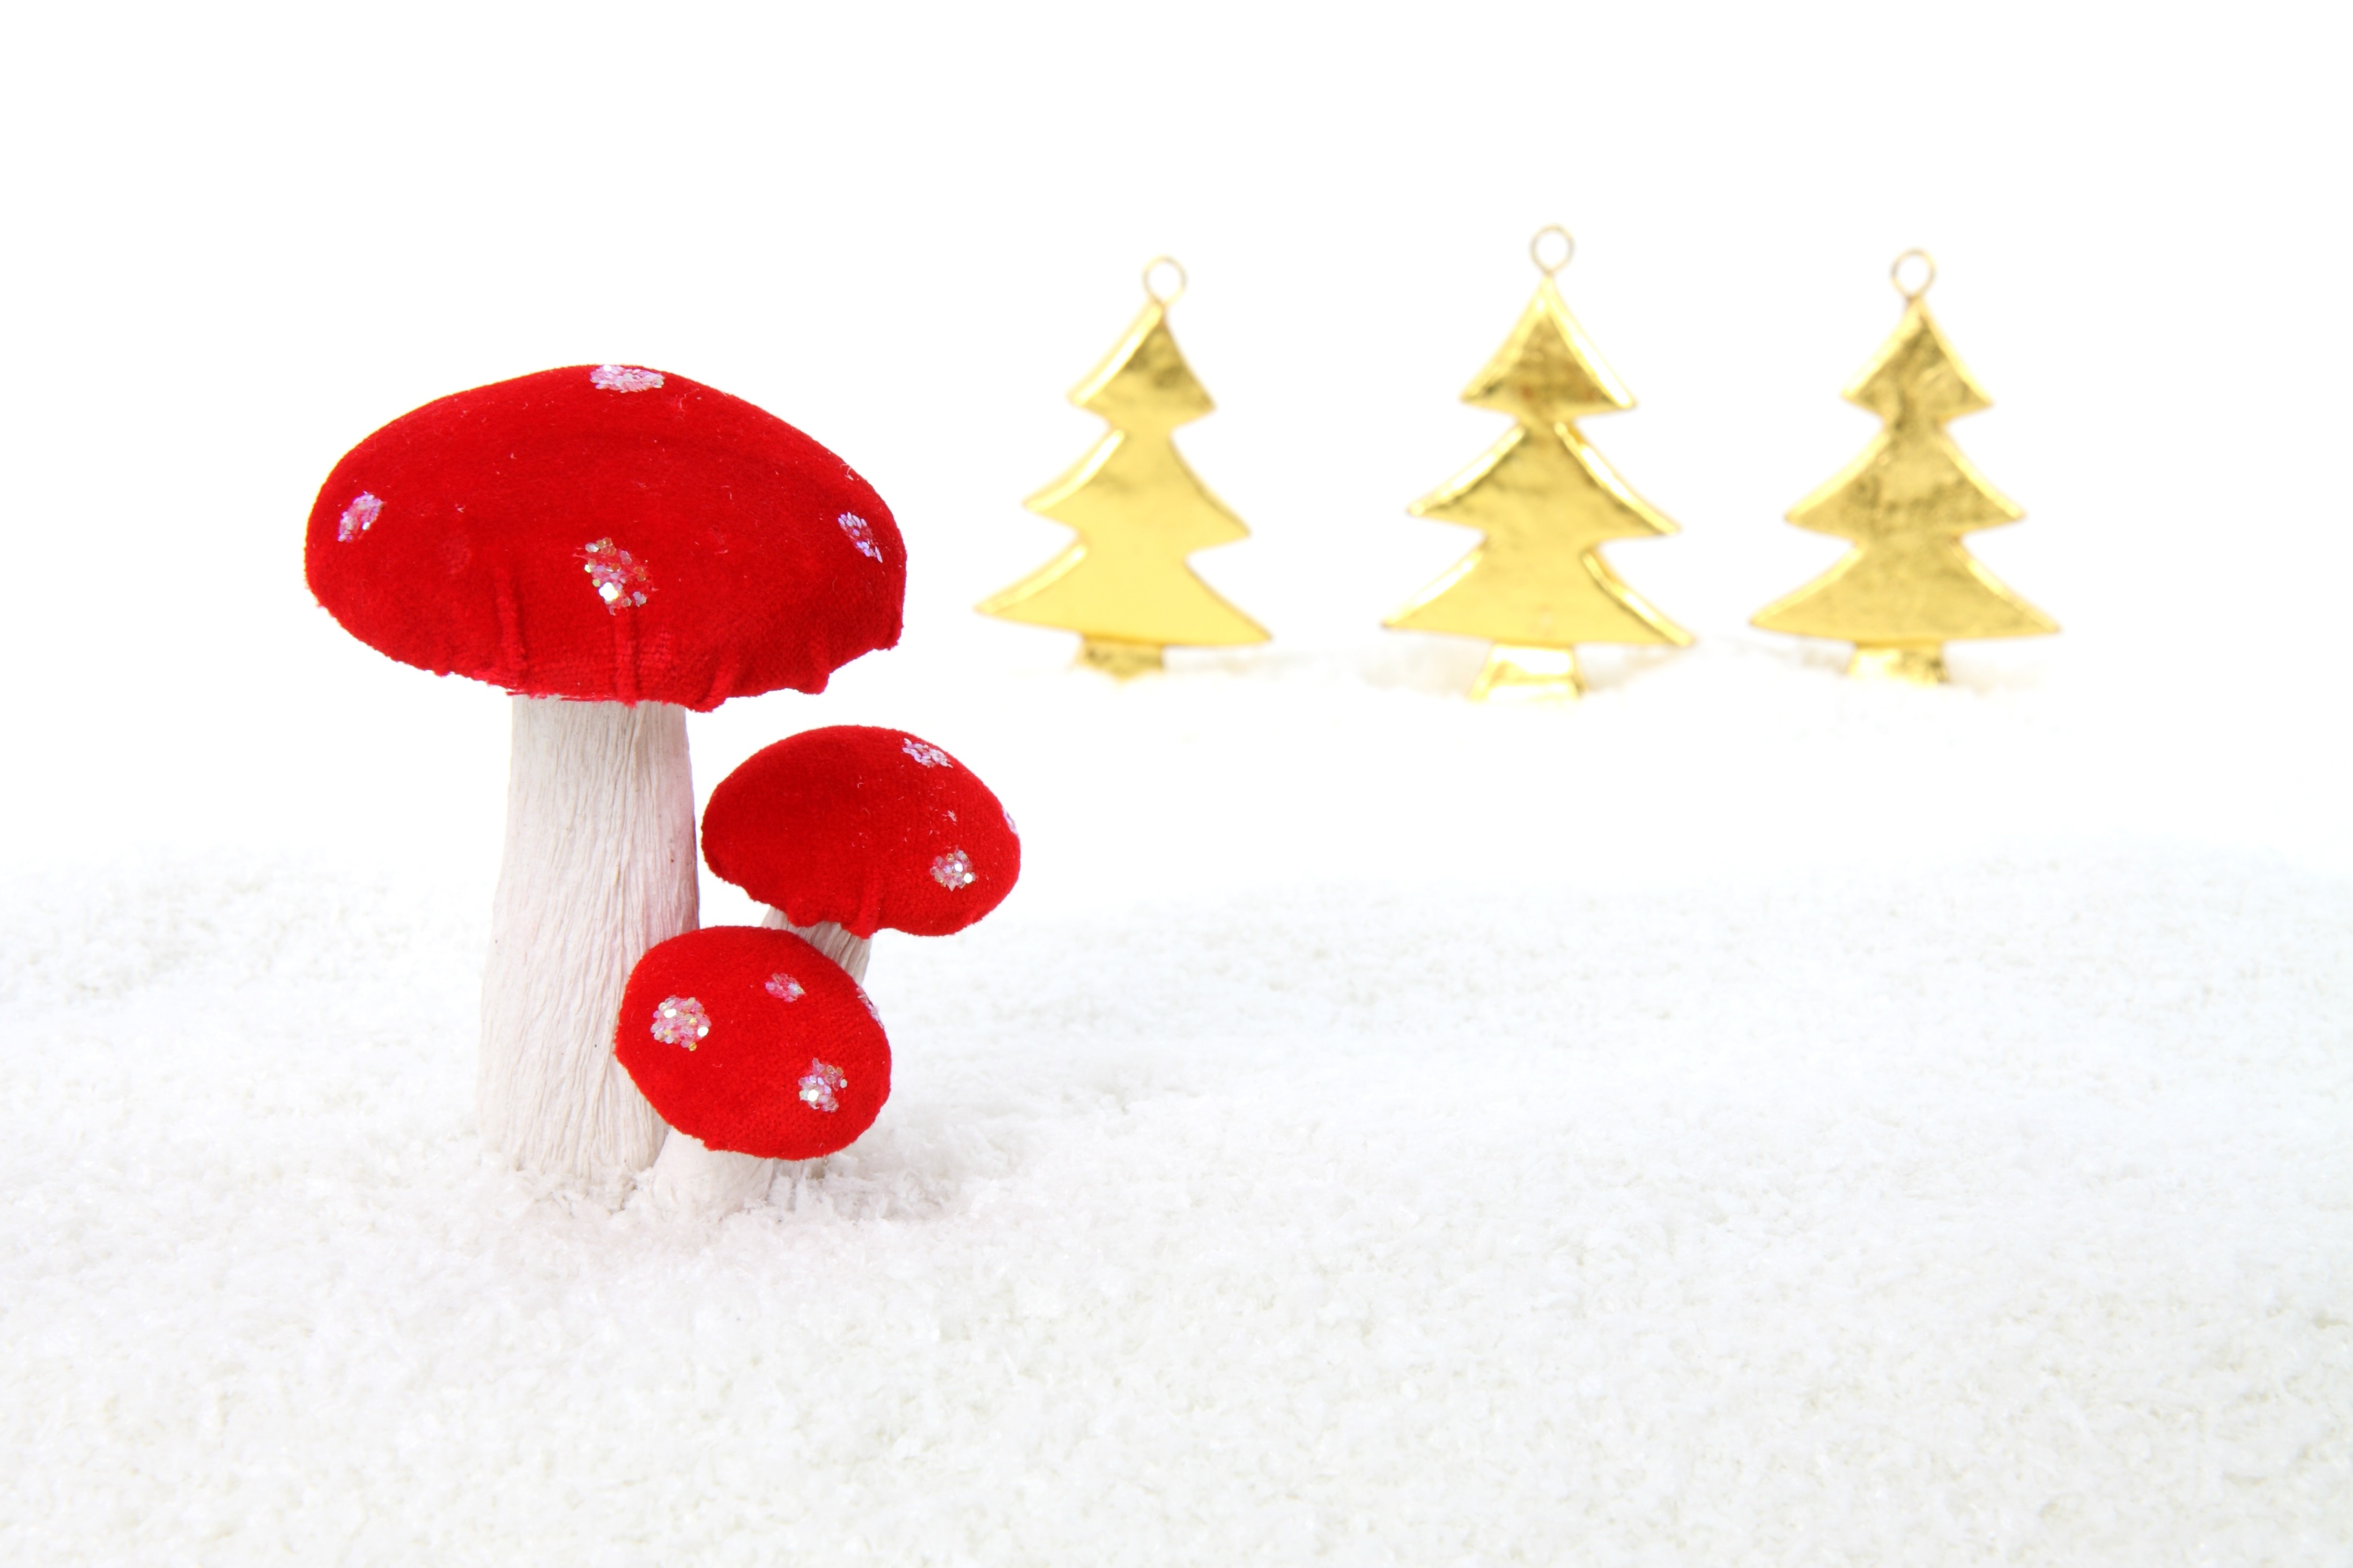 red mushroom and 3 gold tree ornaments